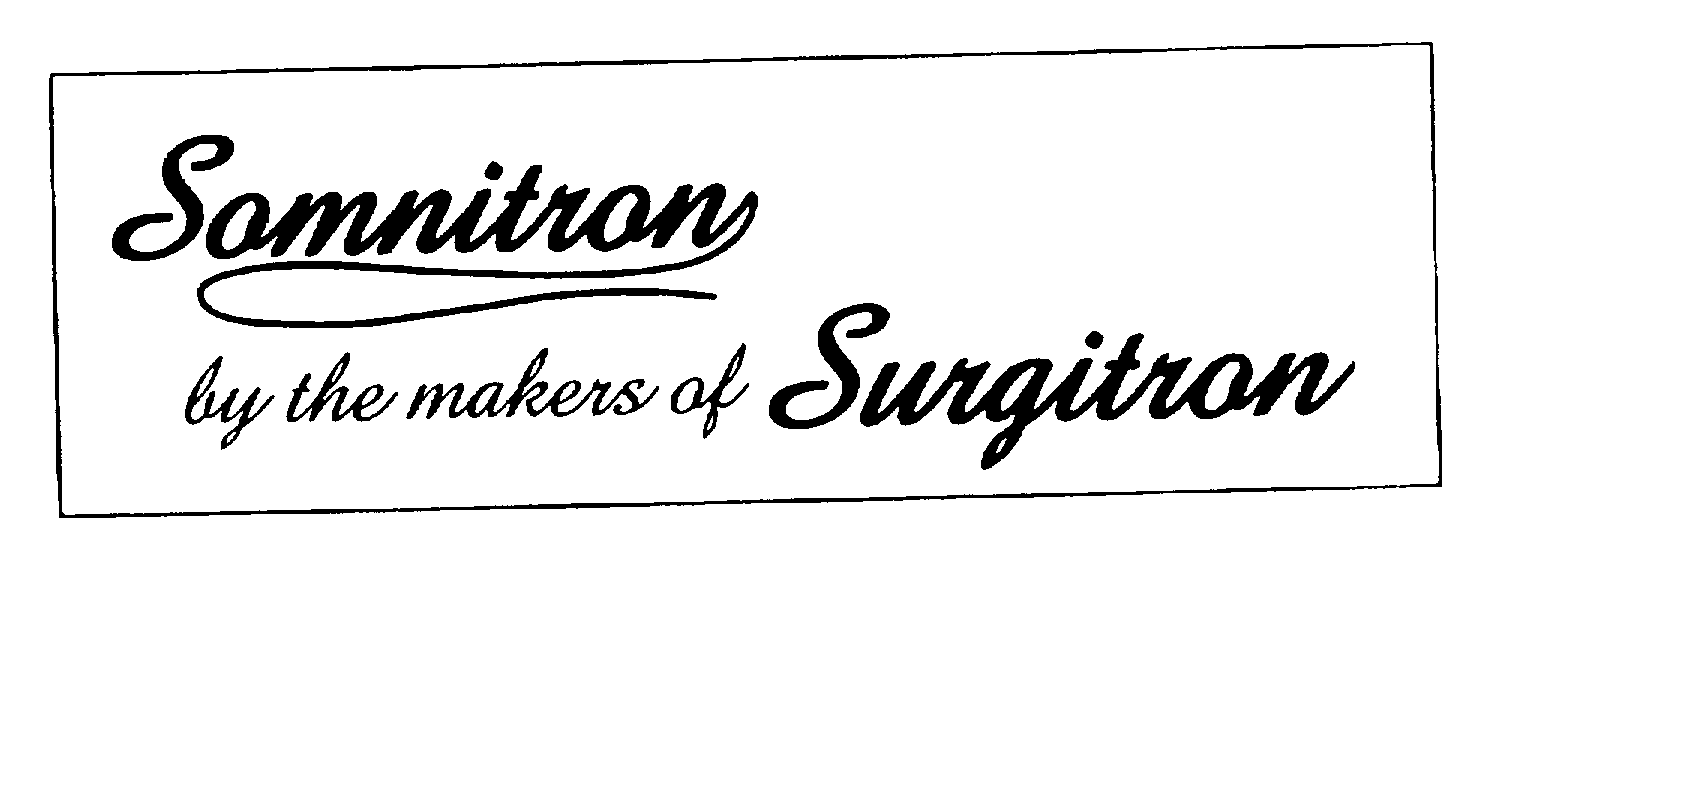  SOMNITRON BY THE MAKERS OF SURGITRON